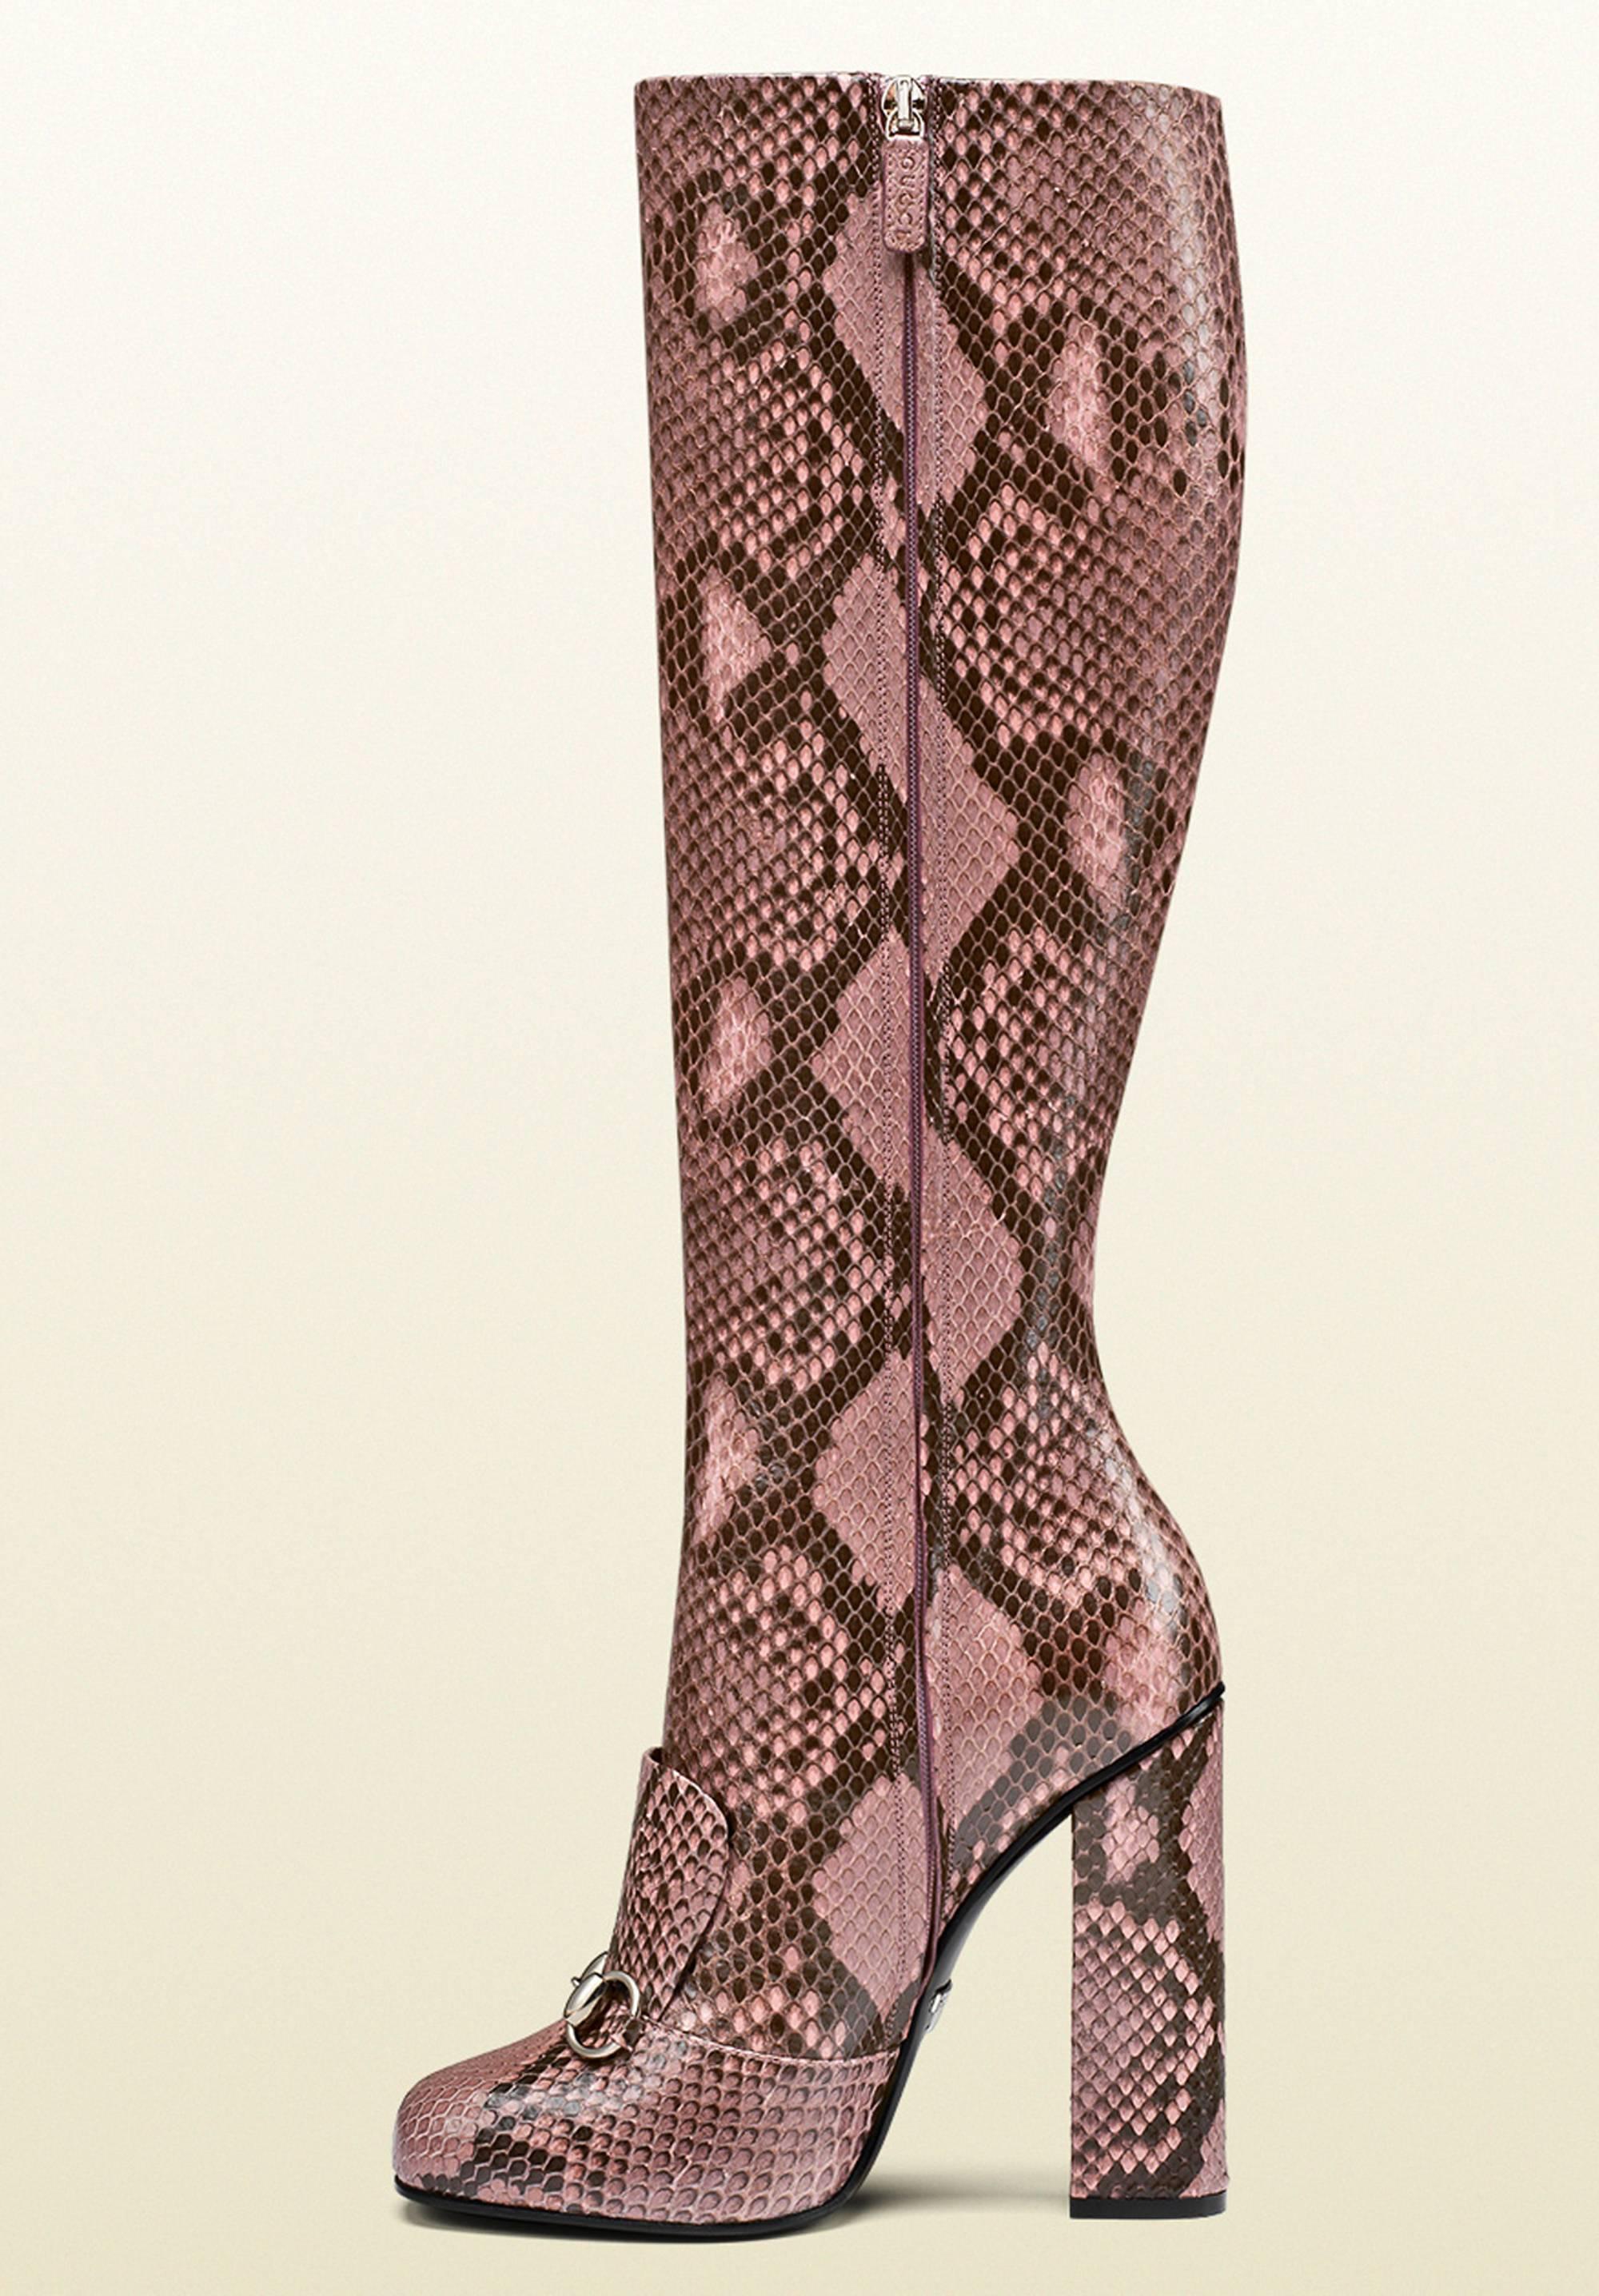 Cut Slim to Showcase Your Legs, The Season's Must-Have Boots Breathe Retro-Tinged Sophistication with Precious Candy-Colored Python and a Chic Stacked Heel.

New GUCCI PYTHON Knee Height Boots
Designer Size  It.39.5 - US 10 ( Run have a size